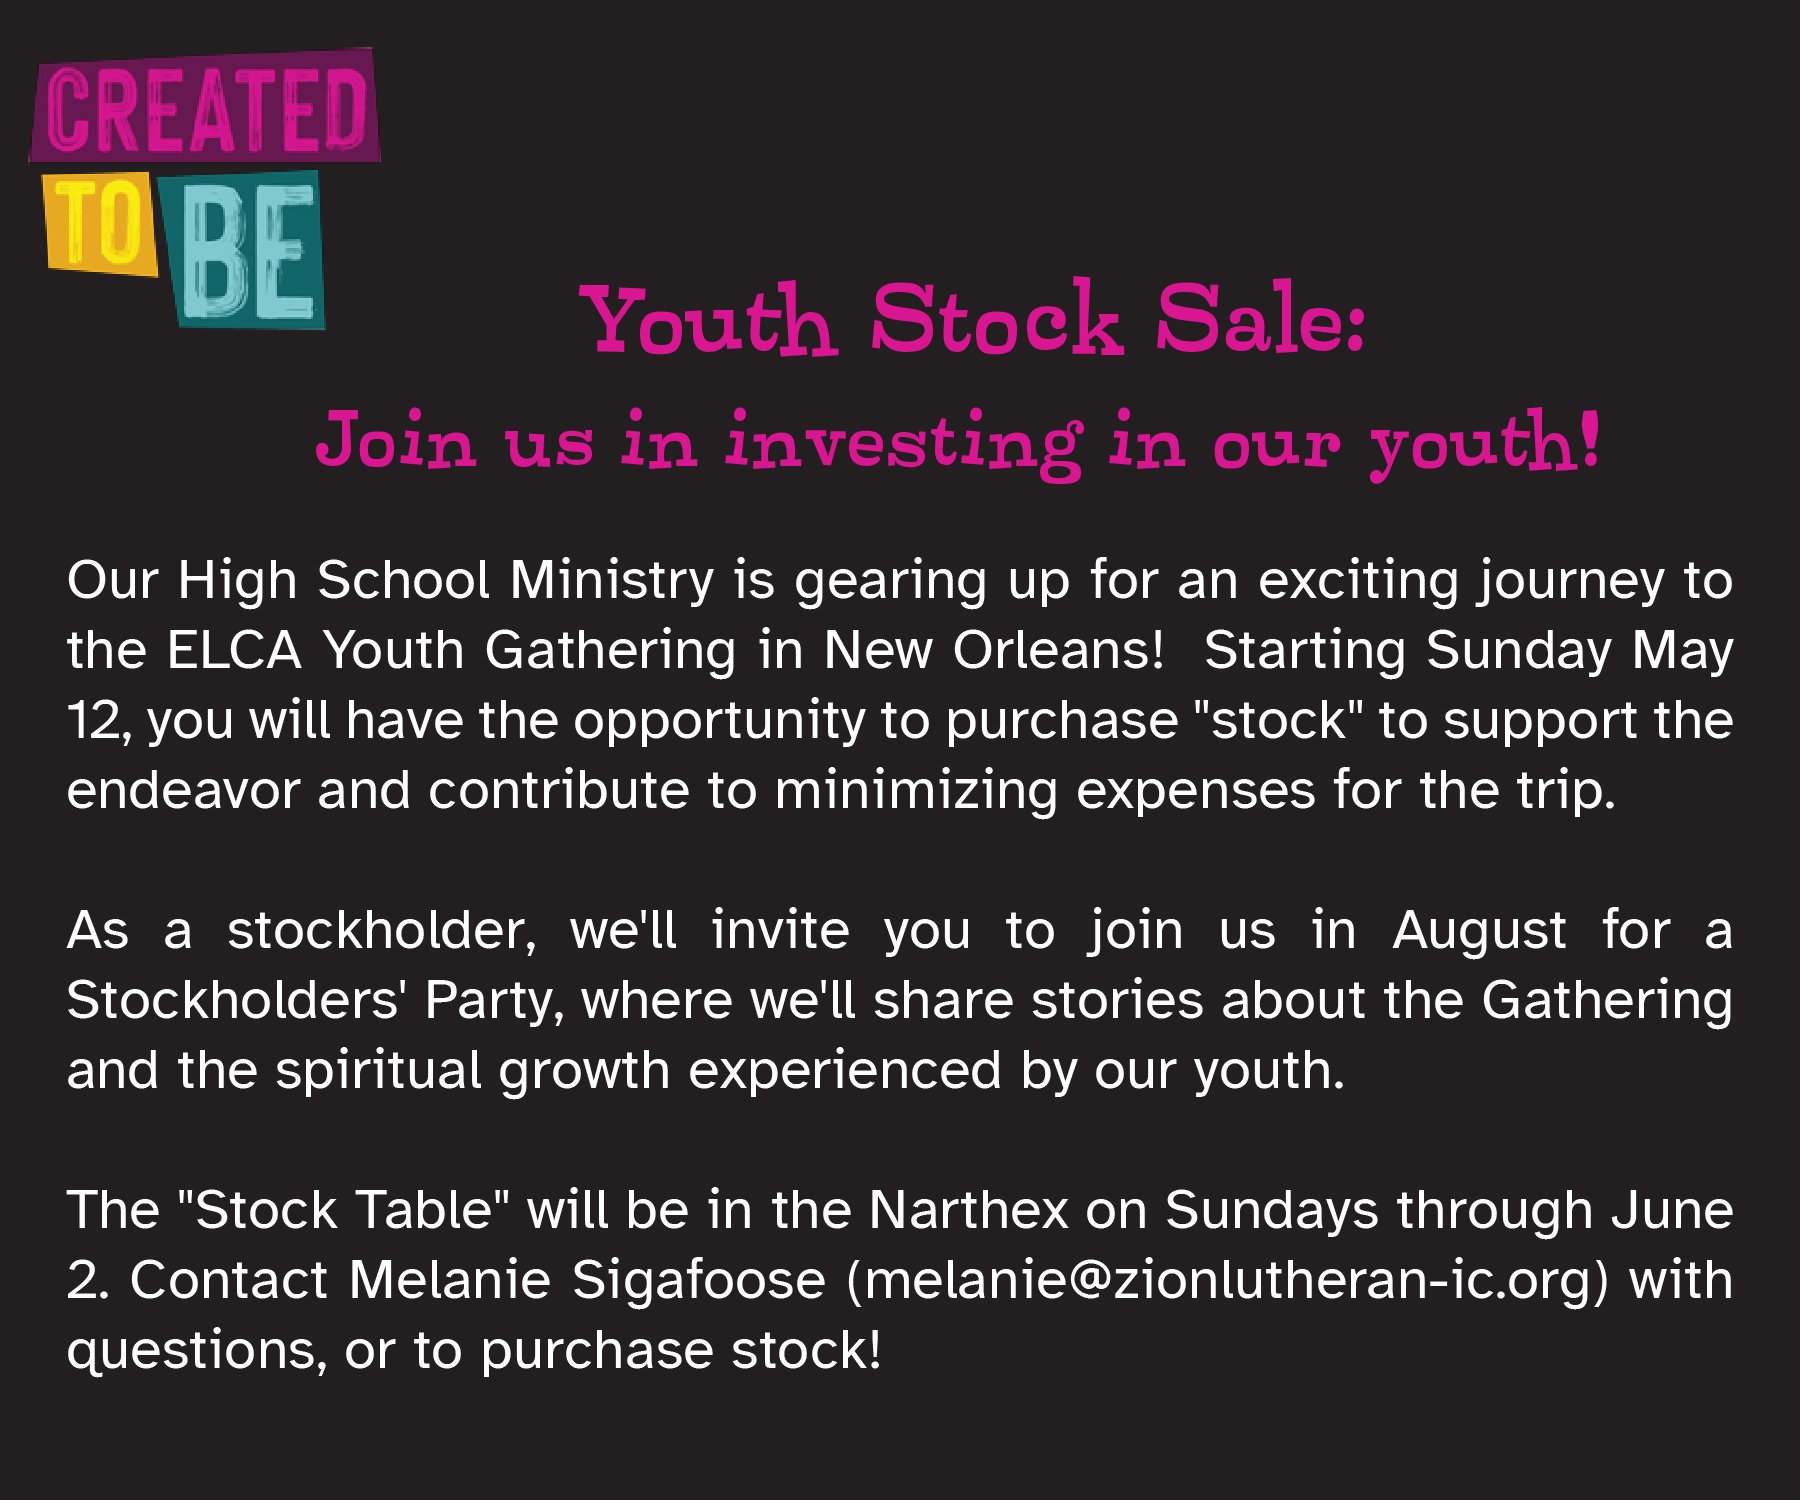 Help out our youth💛 by contacting Melanie Sigafoose ( melanie@zionlutheran-ic.org ) for questions or to PURCHASE STOCK😄

✨Help out our journey to the ELCA Youth Gathering in New Orleans✨

 #churchcommunity #ChurchOfChrist #iowa #faithcommunity #iow